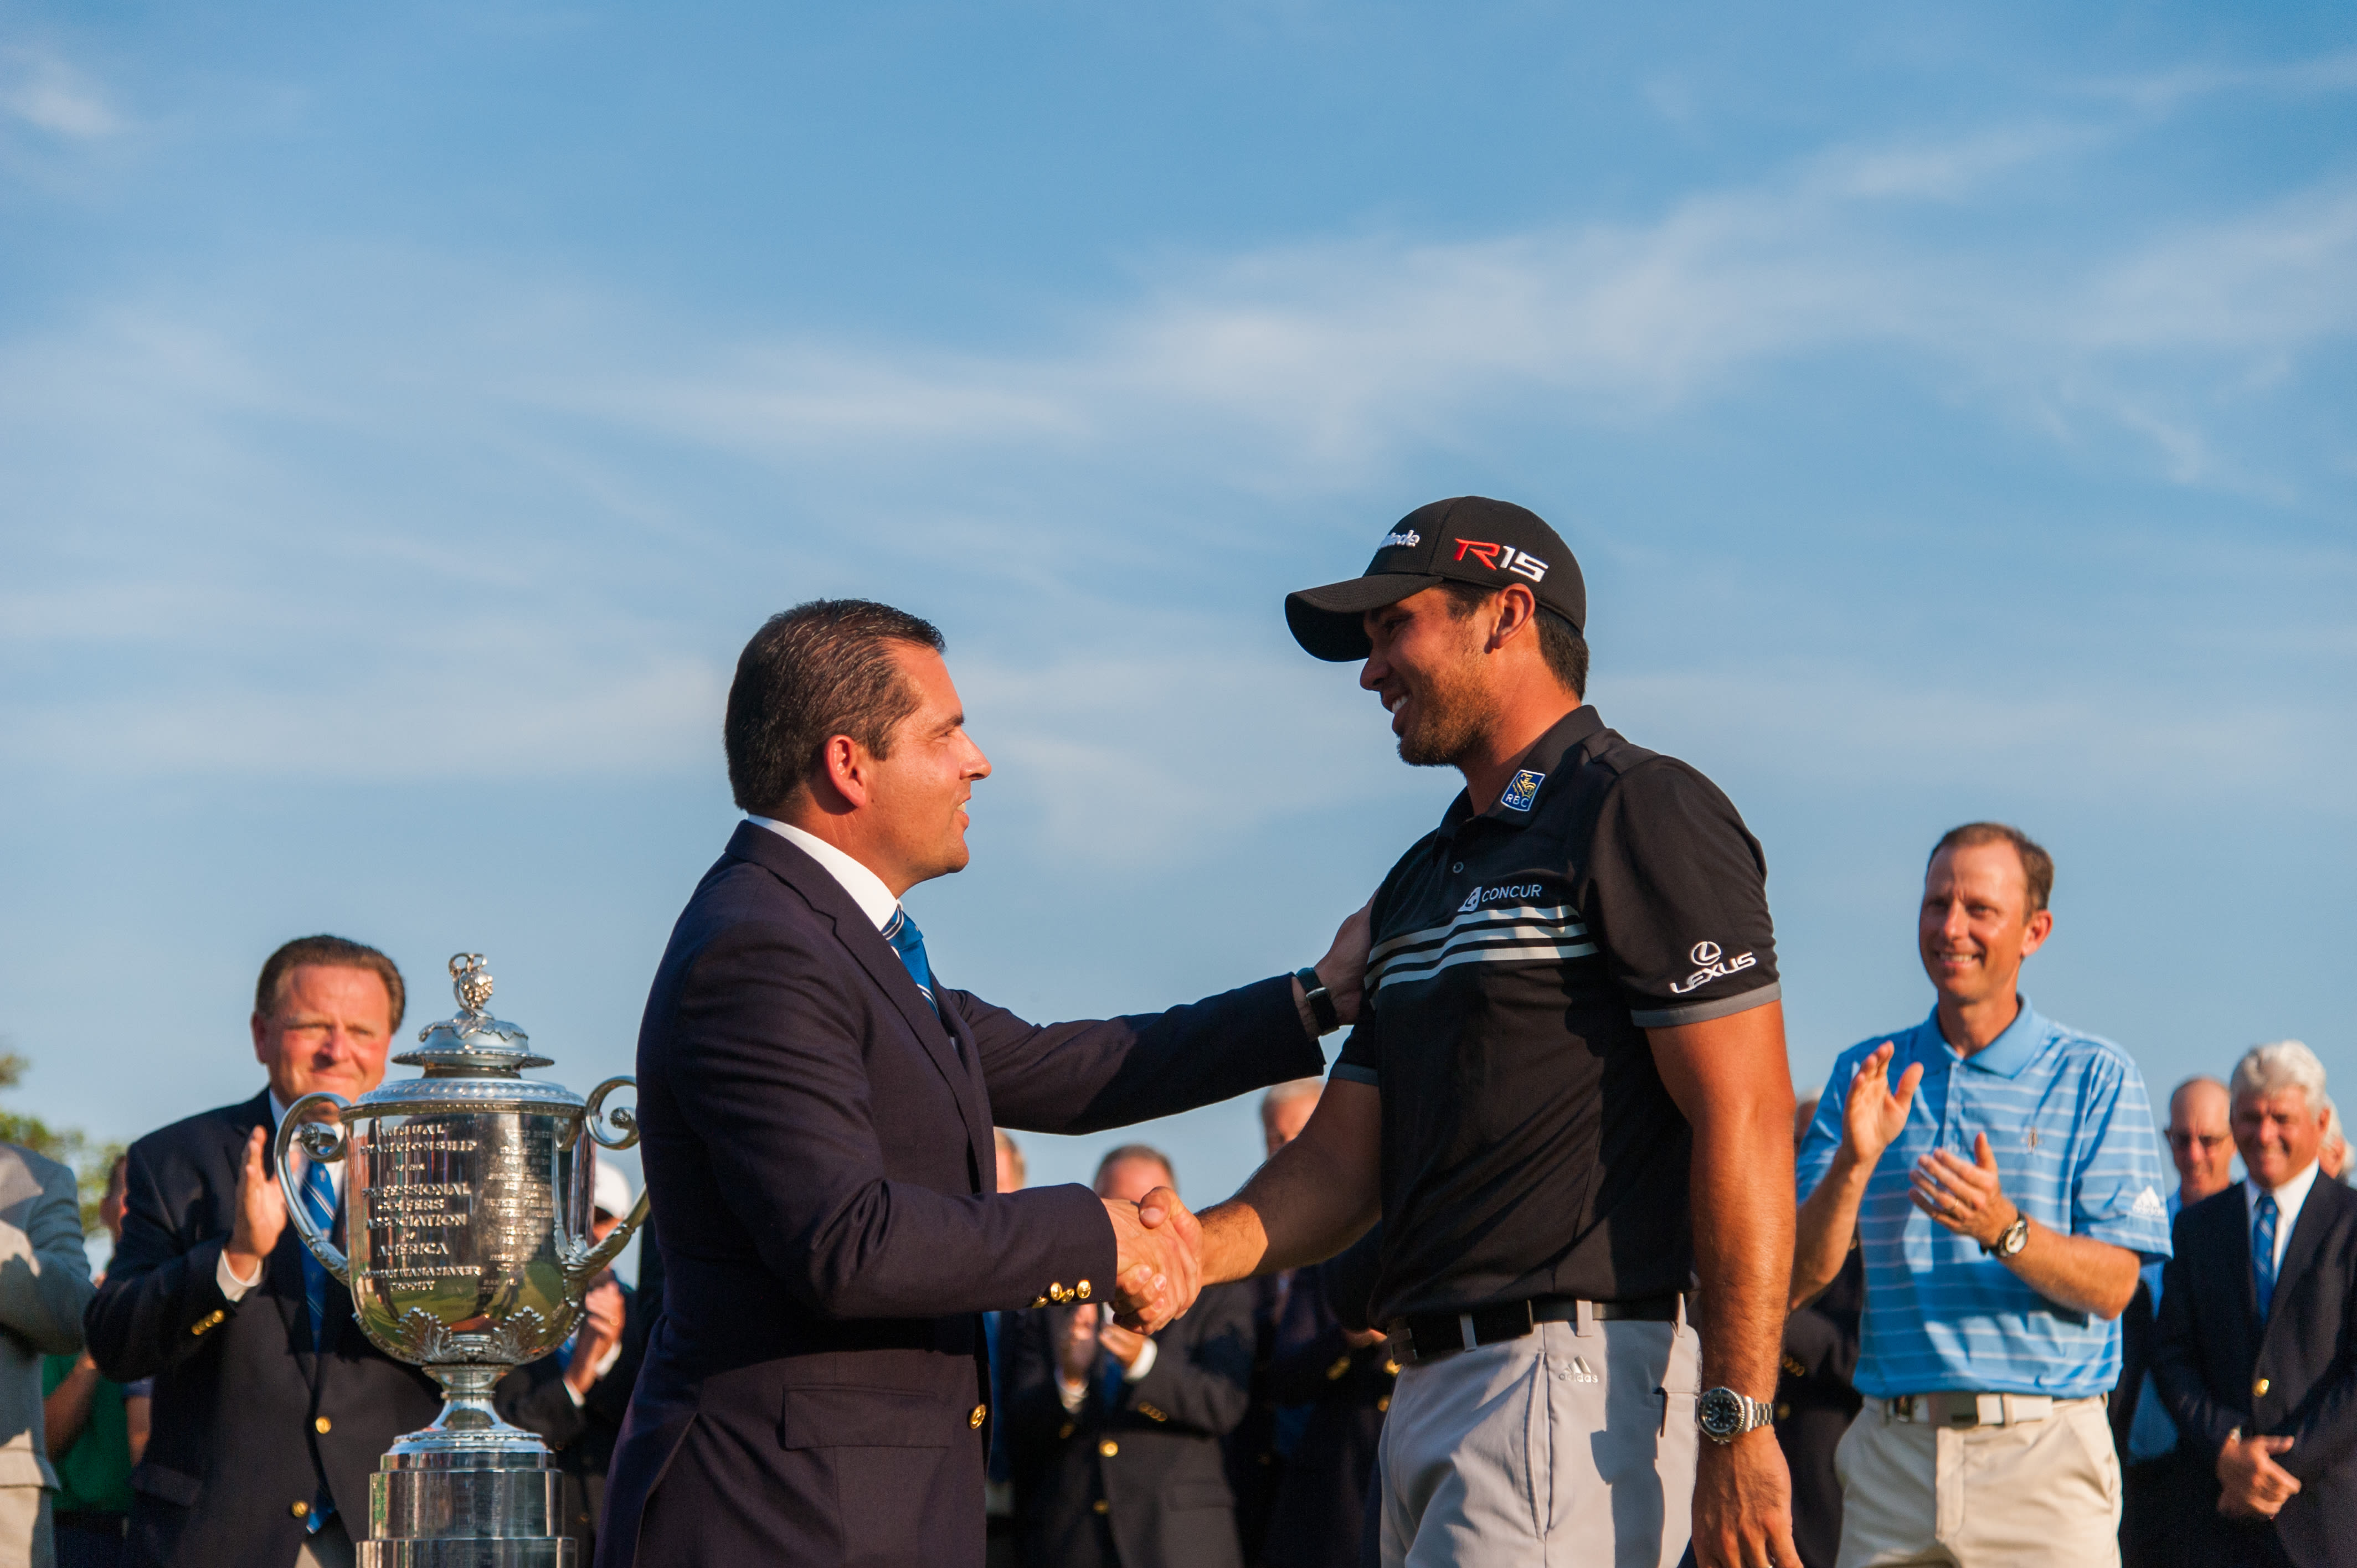 Sprague shakes hands with 2015 PGA Champion Jason Day, who would go on to win The Players the following spring at TPC Sawgrass.